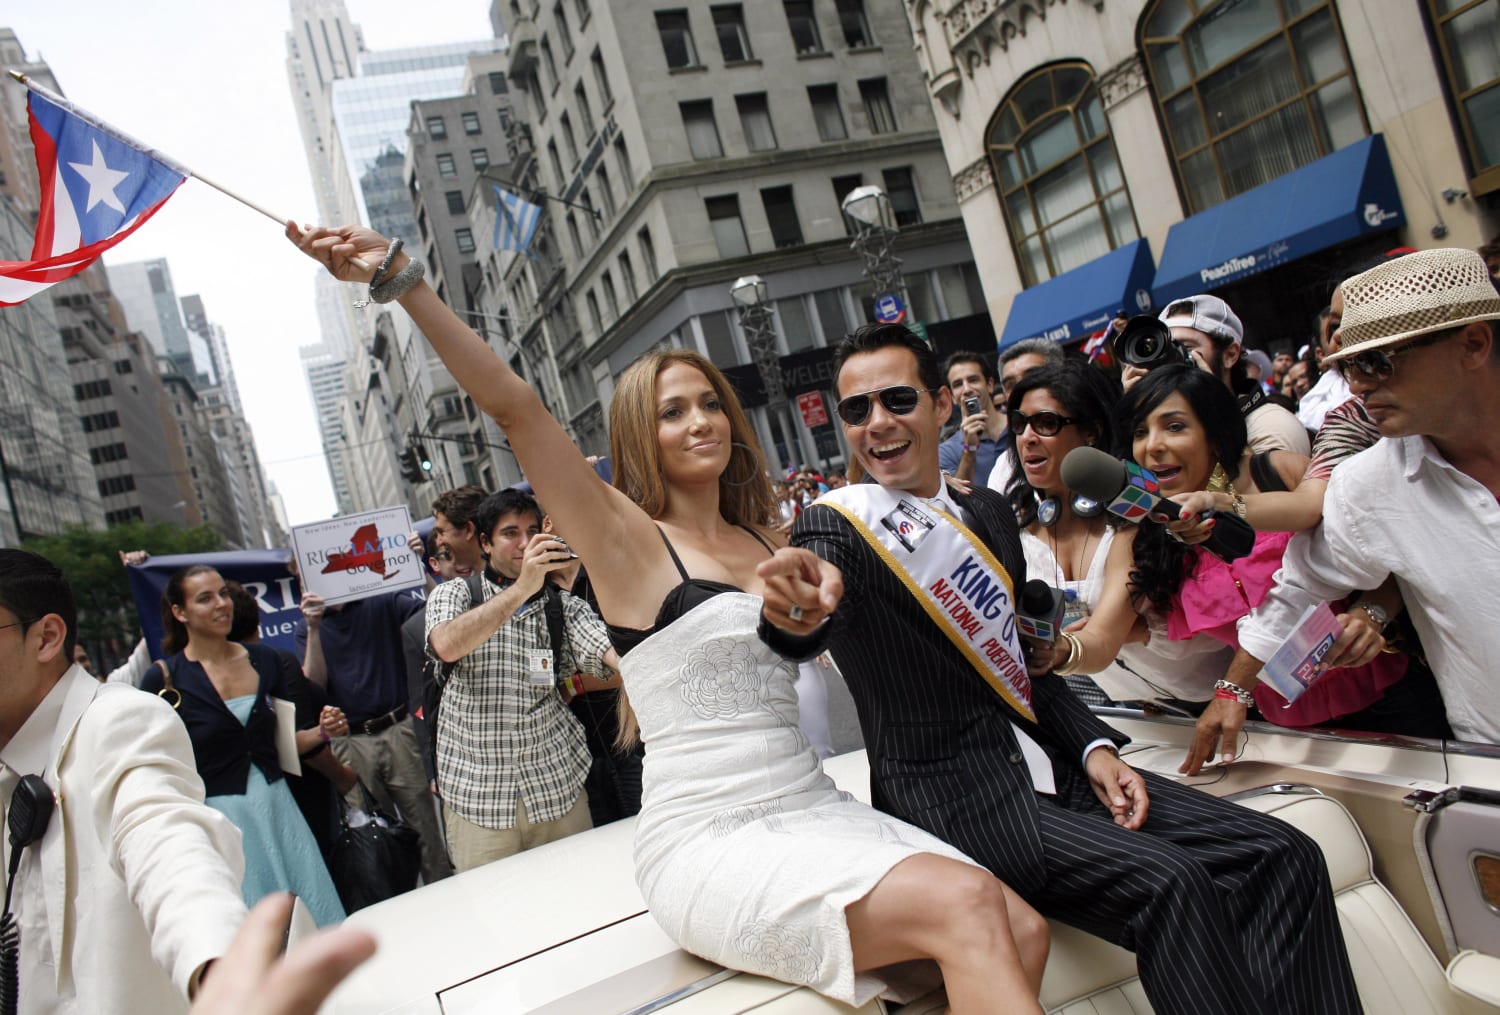 Puerto Rican Day Parade Stirs Controversy, Loses Sponsors Over Honoree